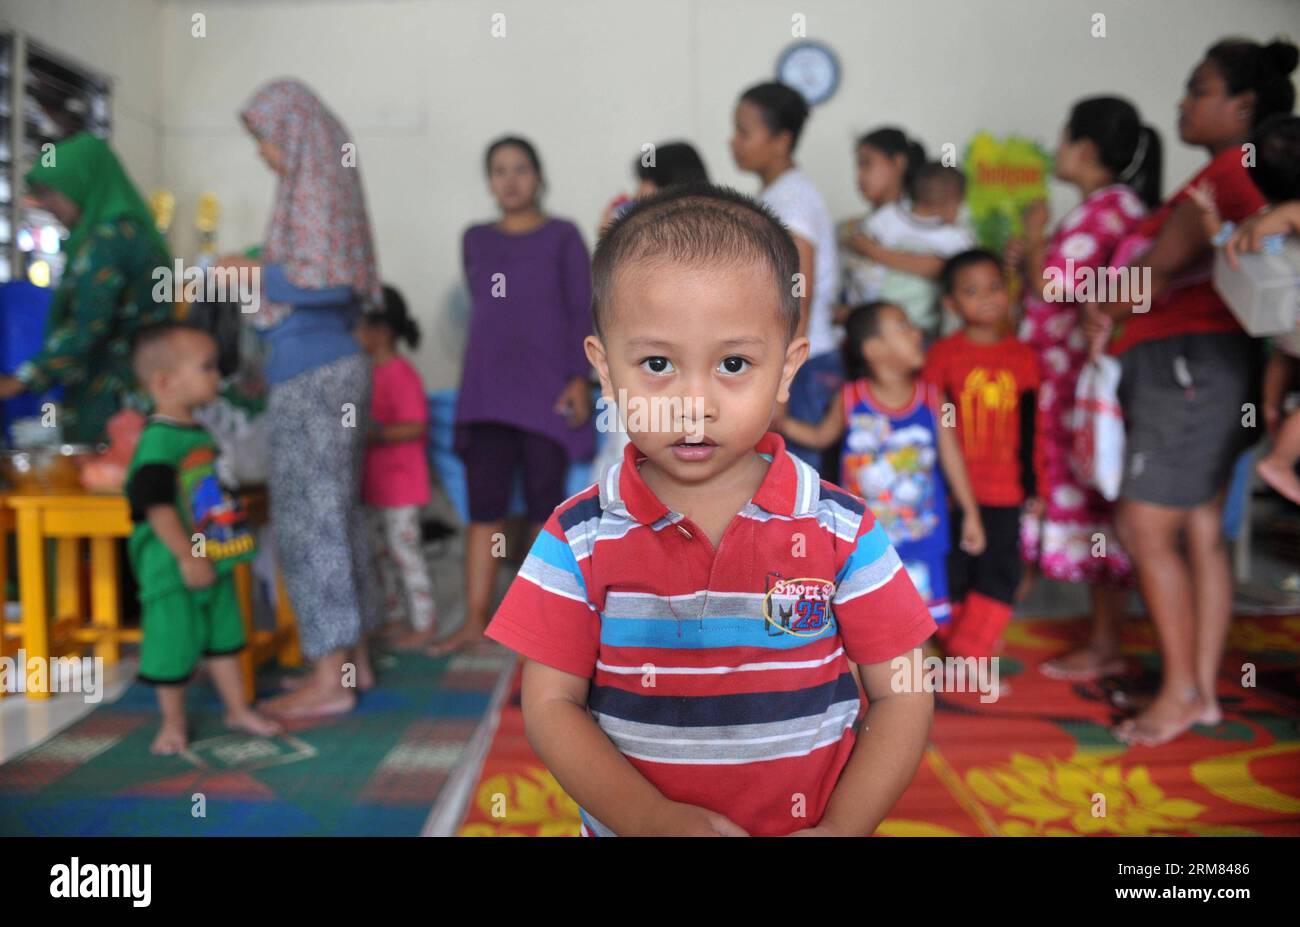 (140327) -- JAKARTA, March 27, 2014 (Xinhua) -- A boy poses for photos while people queue up at the health service center for children (Posyandu) at a slum area in Jakarta, Indonesia, March 27, 2014. (Xinhua/Agung Kuncahya B.) INDONESIA-JAKARTA-NUTRITION-CHILDREN PUBLICATIONxNOTxINxCHN   Jakarta March 27 2014 XINHUA a Boy Poses for Photos while Celebrities Queue up AT The Health Service Center for Children  AT a Slum Area in Jakarta Indonesia March 27 2014 XINHUA Agung Kuncahya B Indonesia Jakarta Nutrition Children PUBLICATIONxNOTxINxCHN Stock Photo